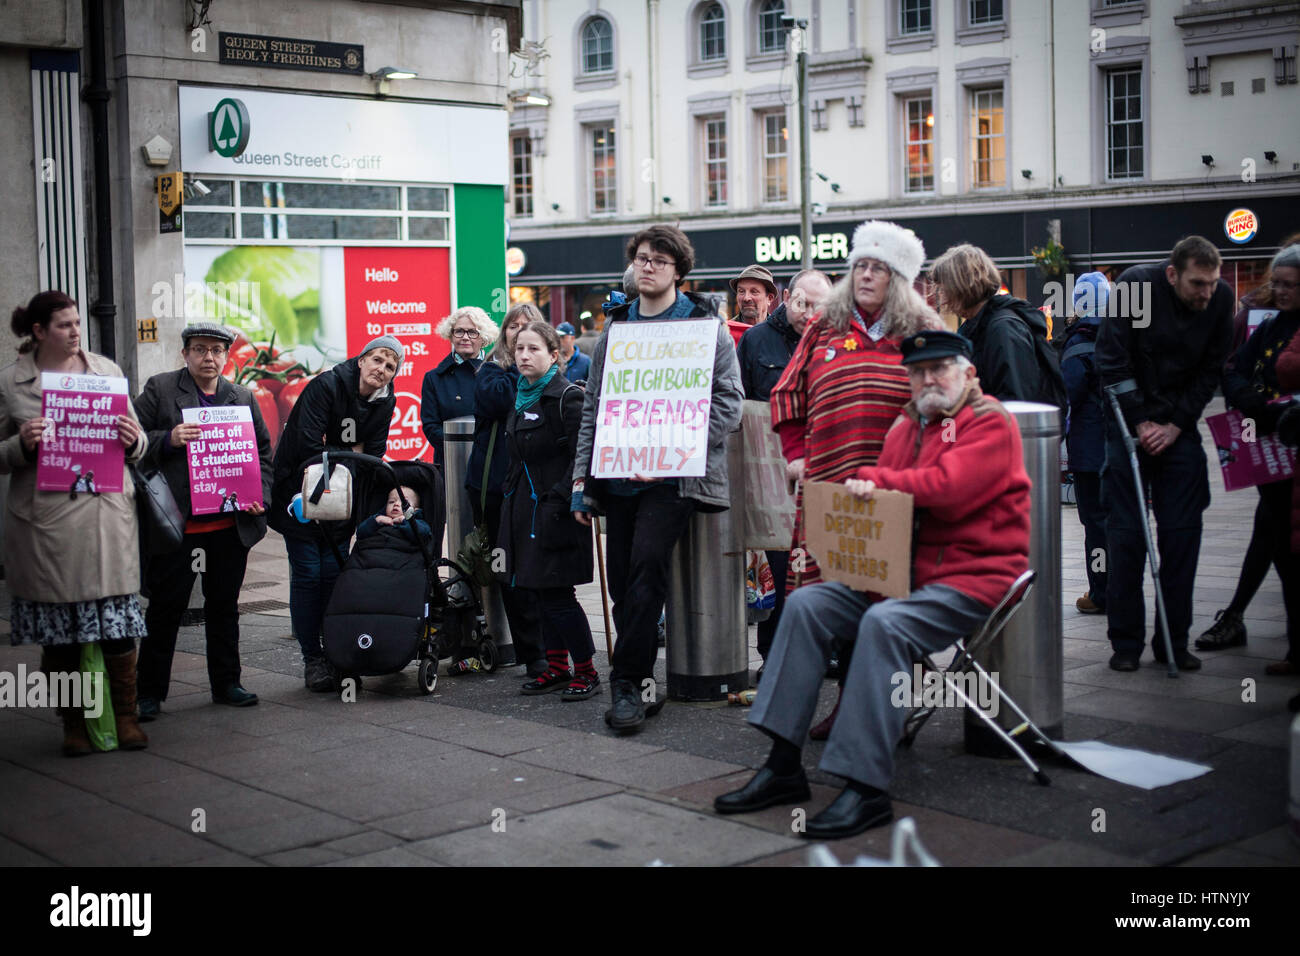 Cardiff, UK. 13th March, 2017. An emergency protest was held to defend EU Citizens' Right to Remain in the UK following the Brexit referendum and the parliamentary debate. Held in Queen Street, Cardiff, the event was addressed by EU citizens presently living in the city as well as activists. Credit: Taz Rahman/Alamy Live News Stock Photo